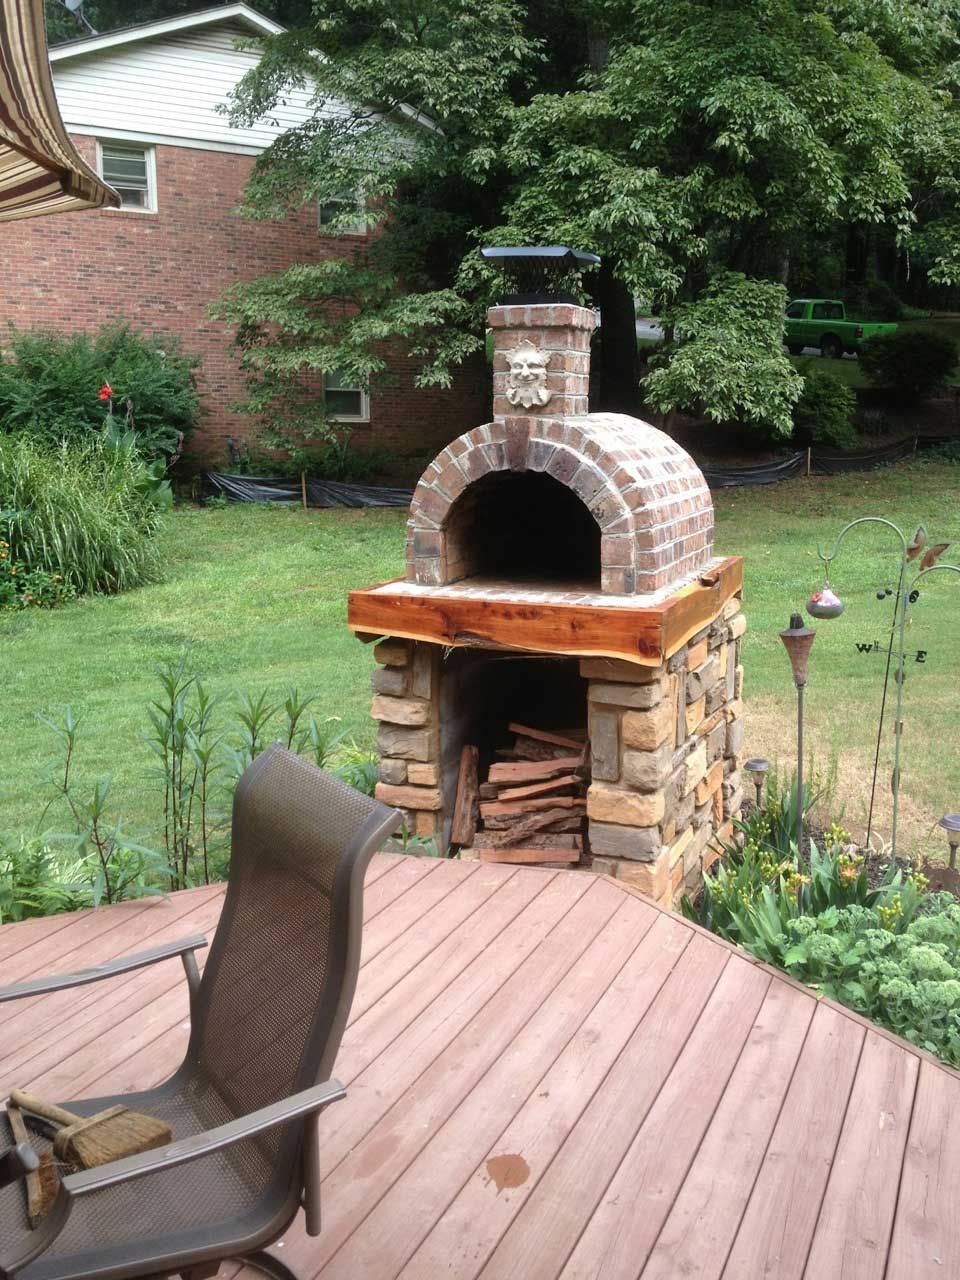 Benefits of a Wood-Fired Oven